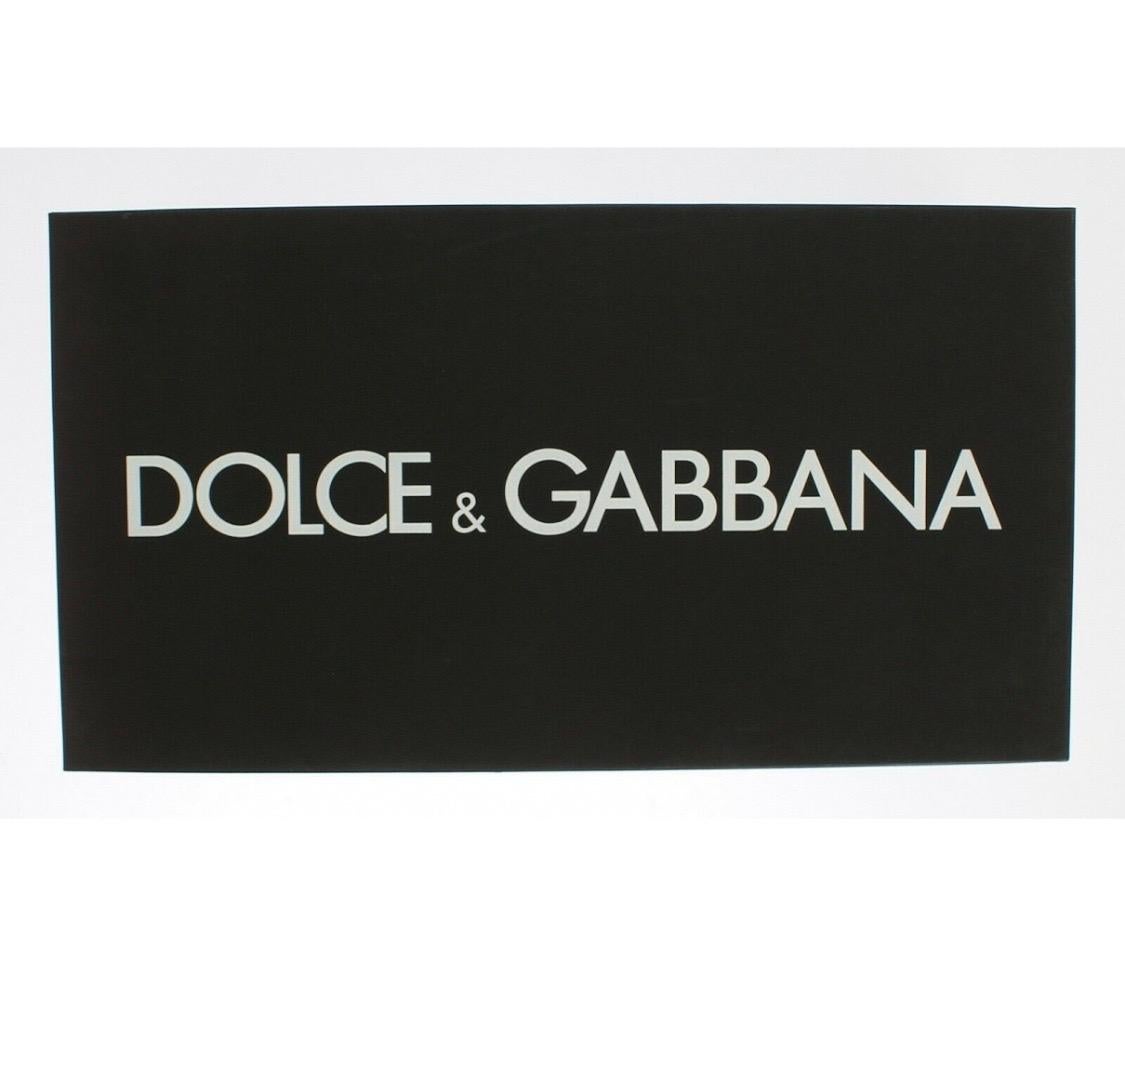 DOLCE & GABBANA

Gorgeous brand new with tags, 100%
Authentic Dolce & Gabbana PUMP lace
shoes with jewel detail on the top.
Model: Pumps

Collection: Rainbow collection
Taormina lace

Color: Purple 

Crystals: Purple and gray 

Material: 30% Cotton,